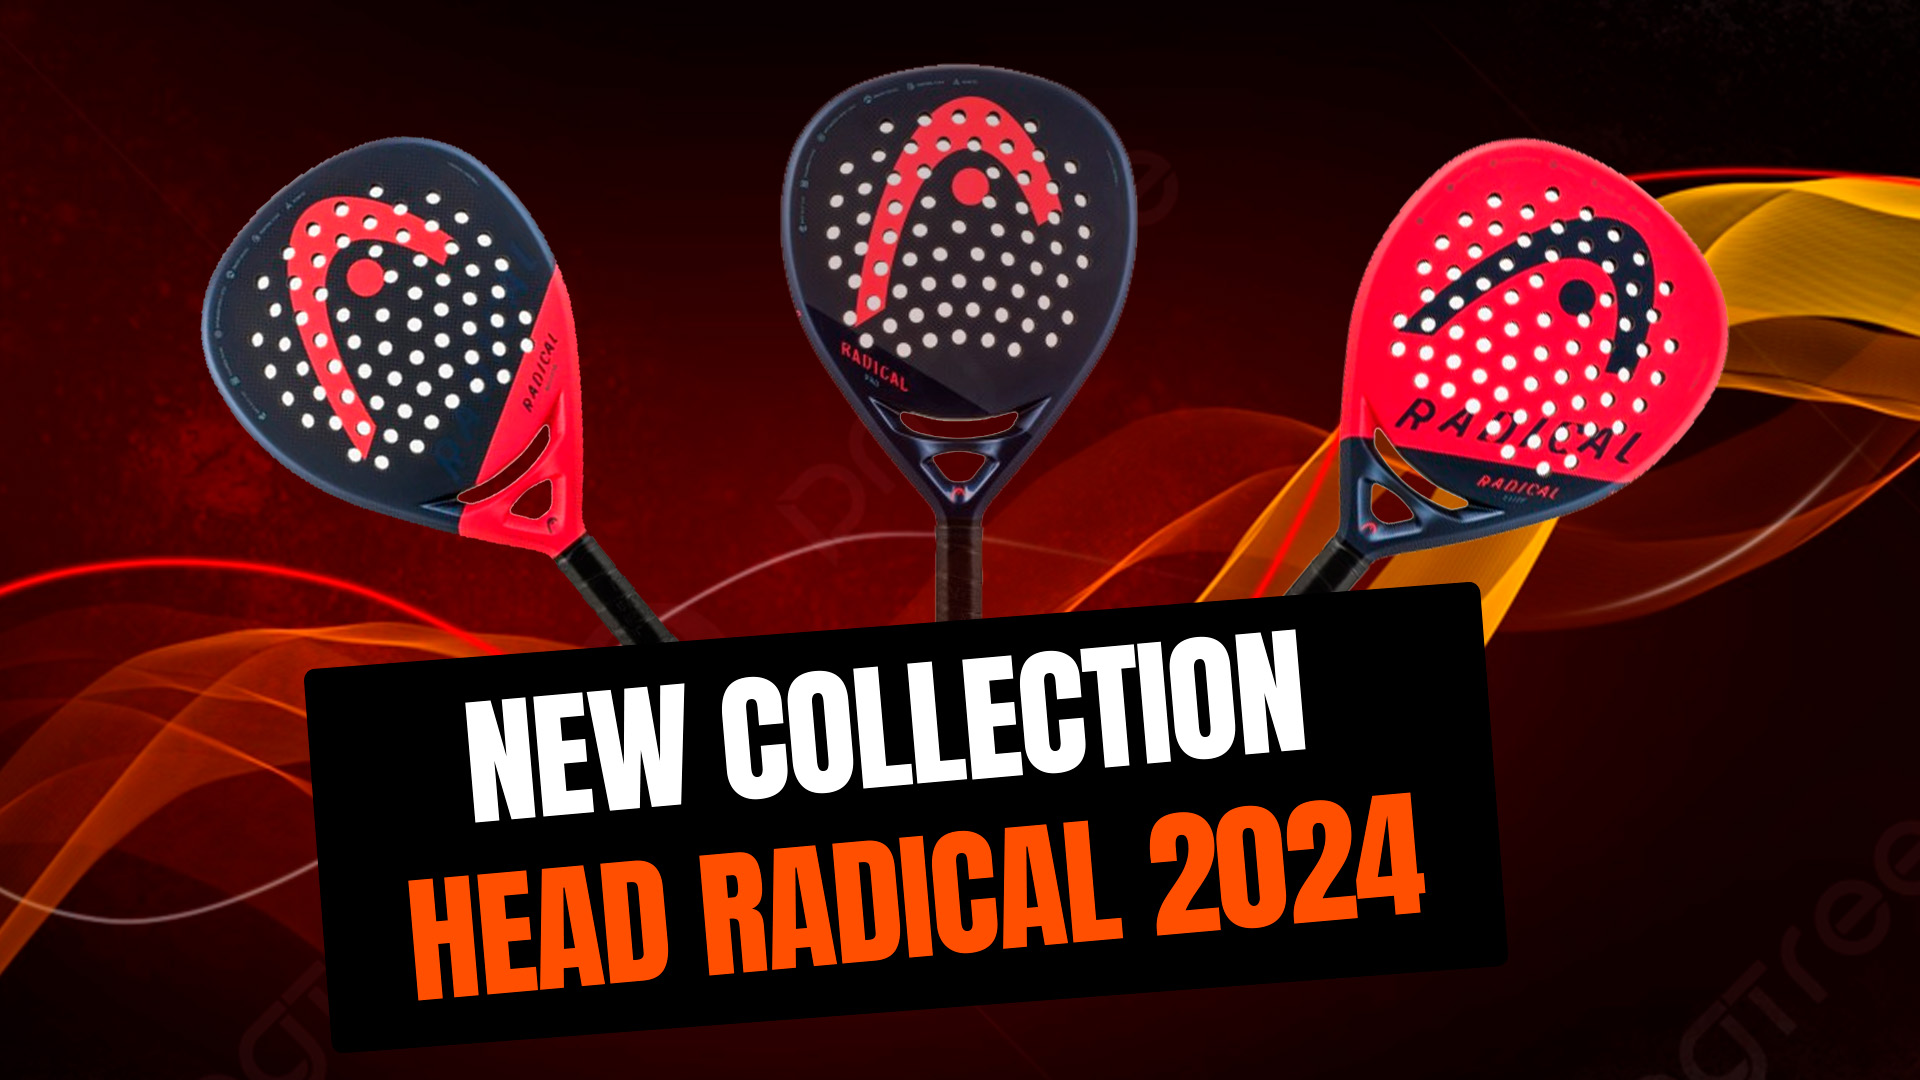 Redefine your game with the new Head Radical 2024 padel rackets